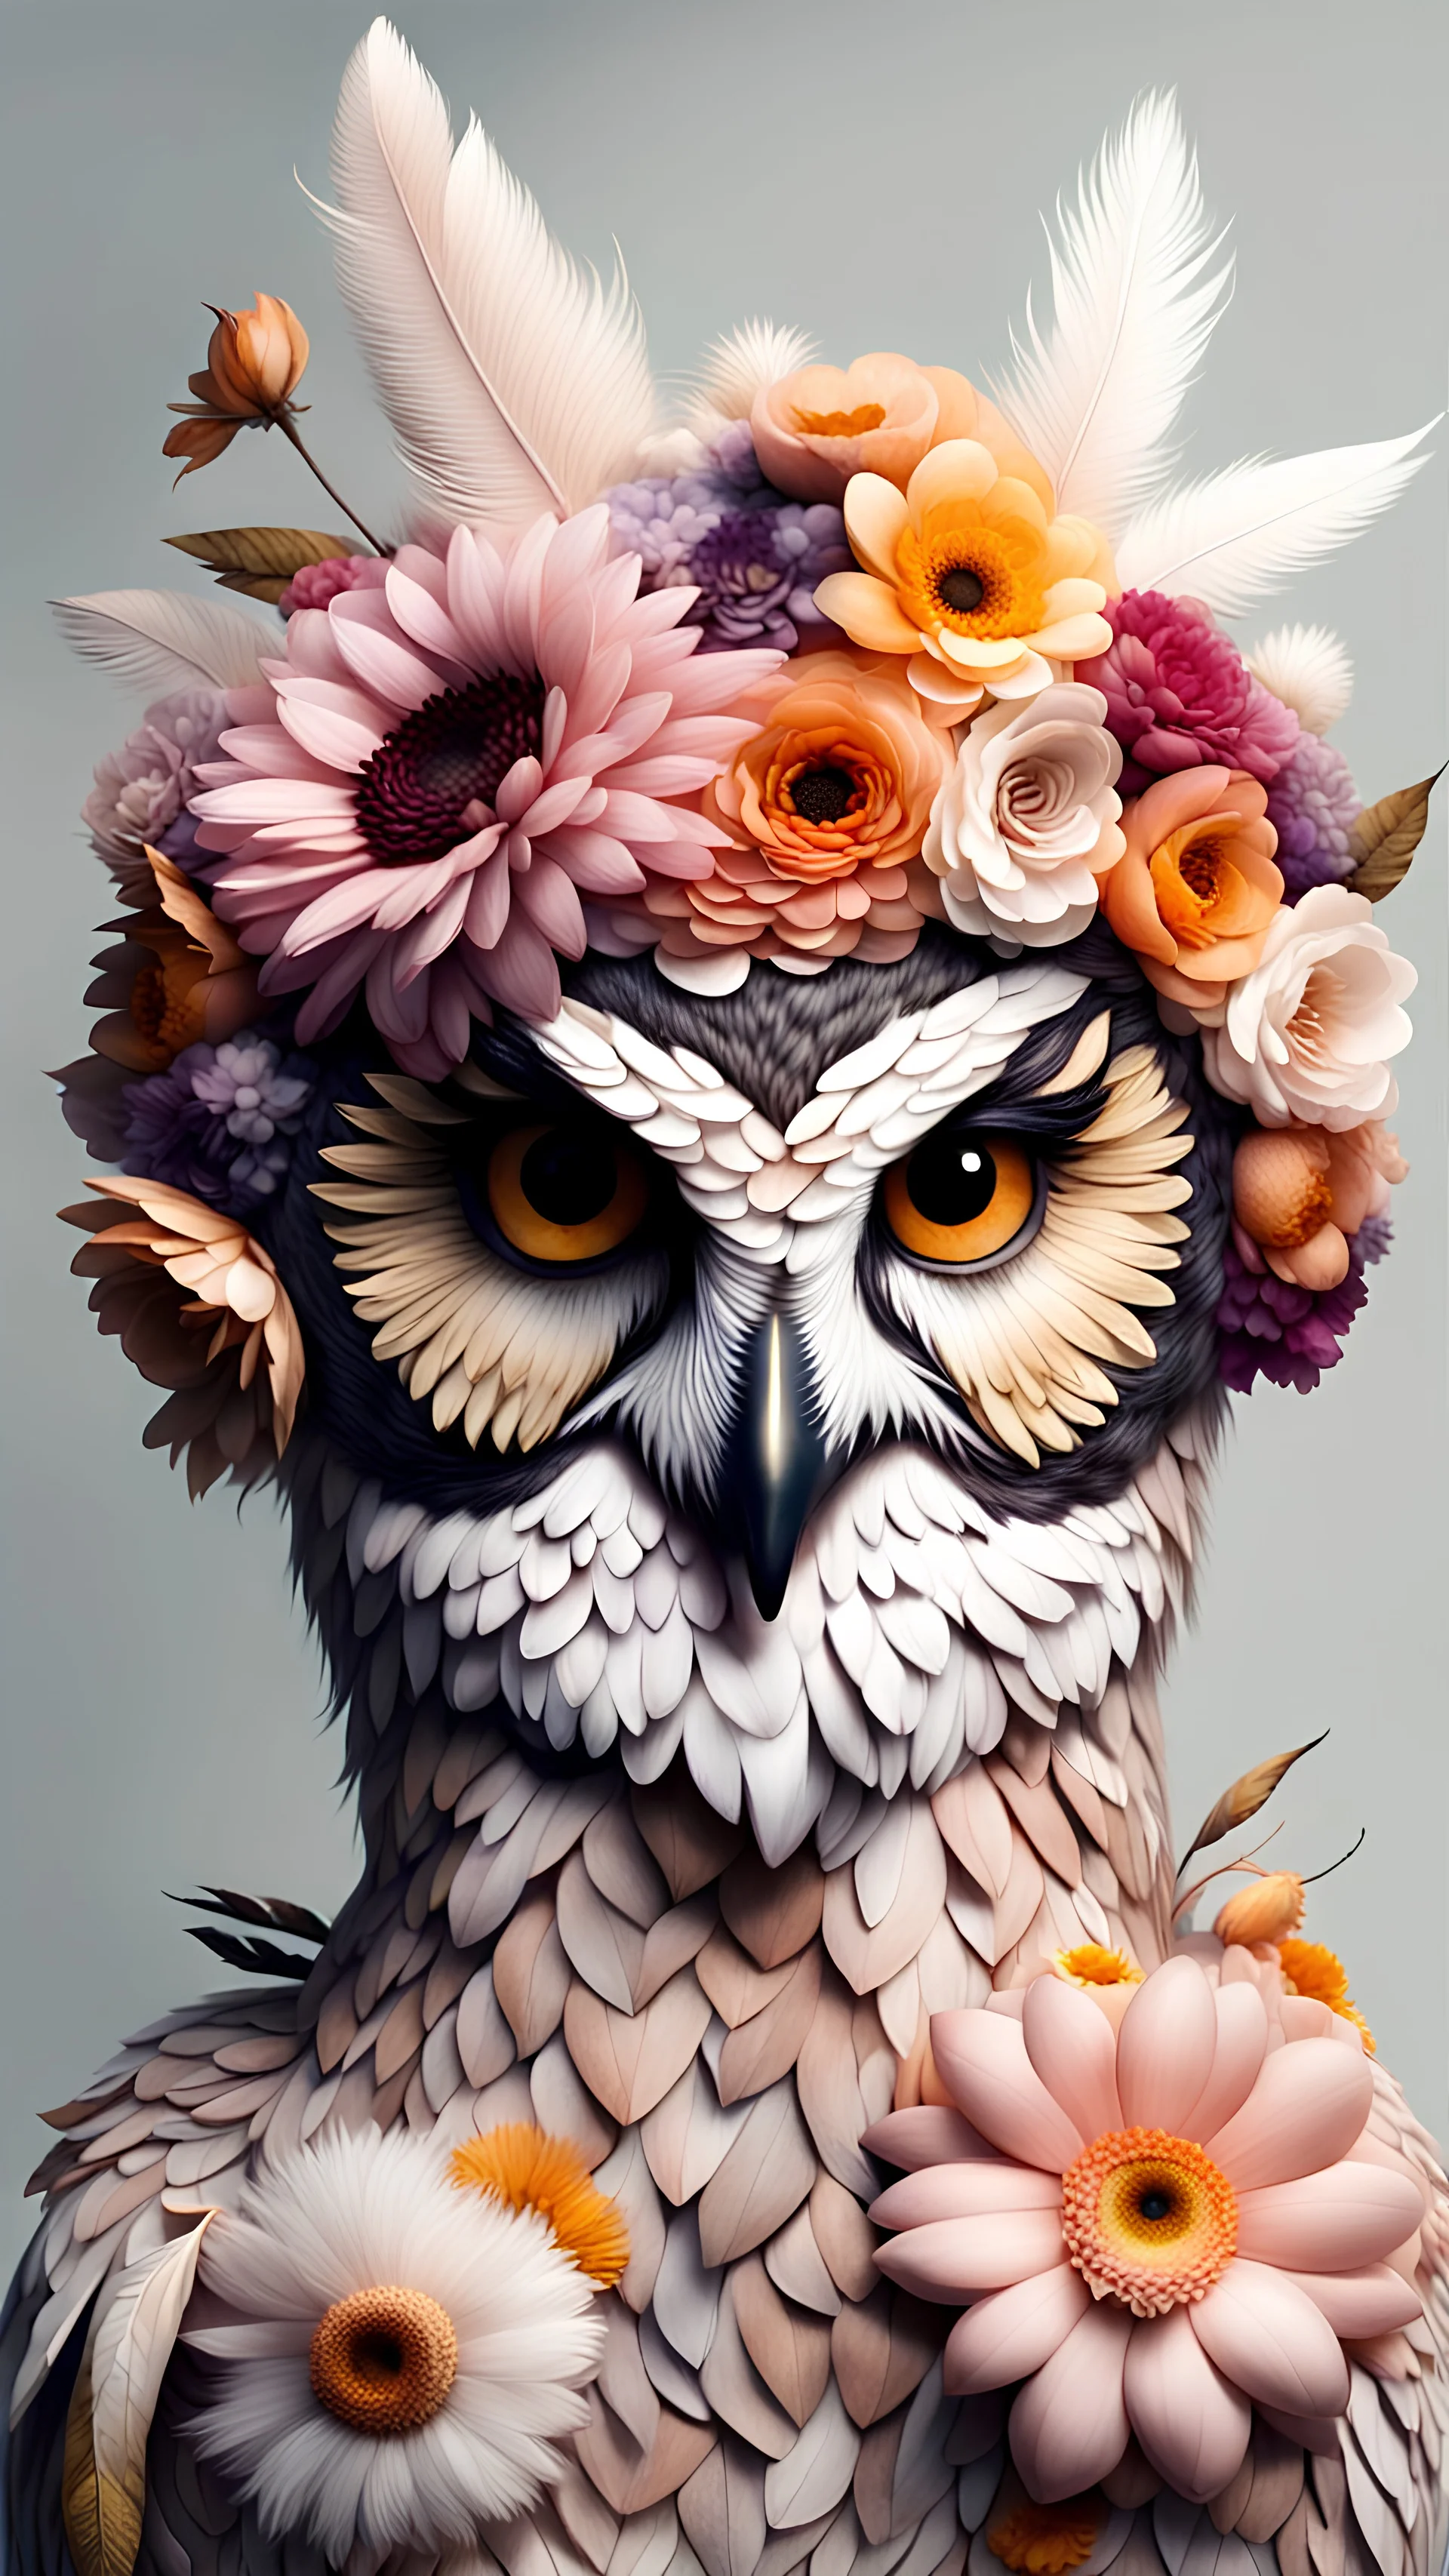 male with owl head made from a lot of beautiful flowers , skin textured with feathers, pale colors smooth contrast,